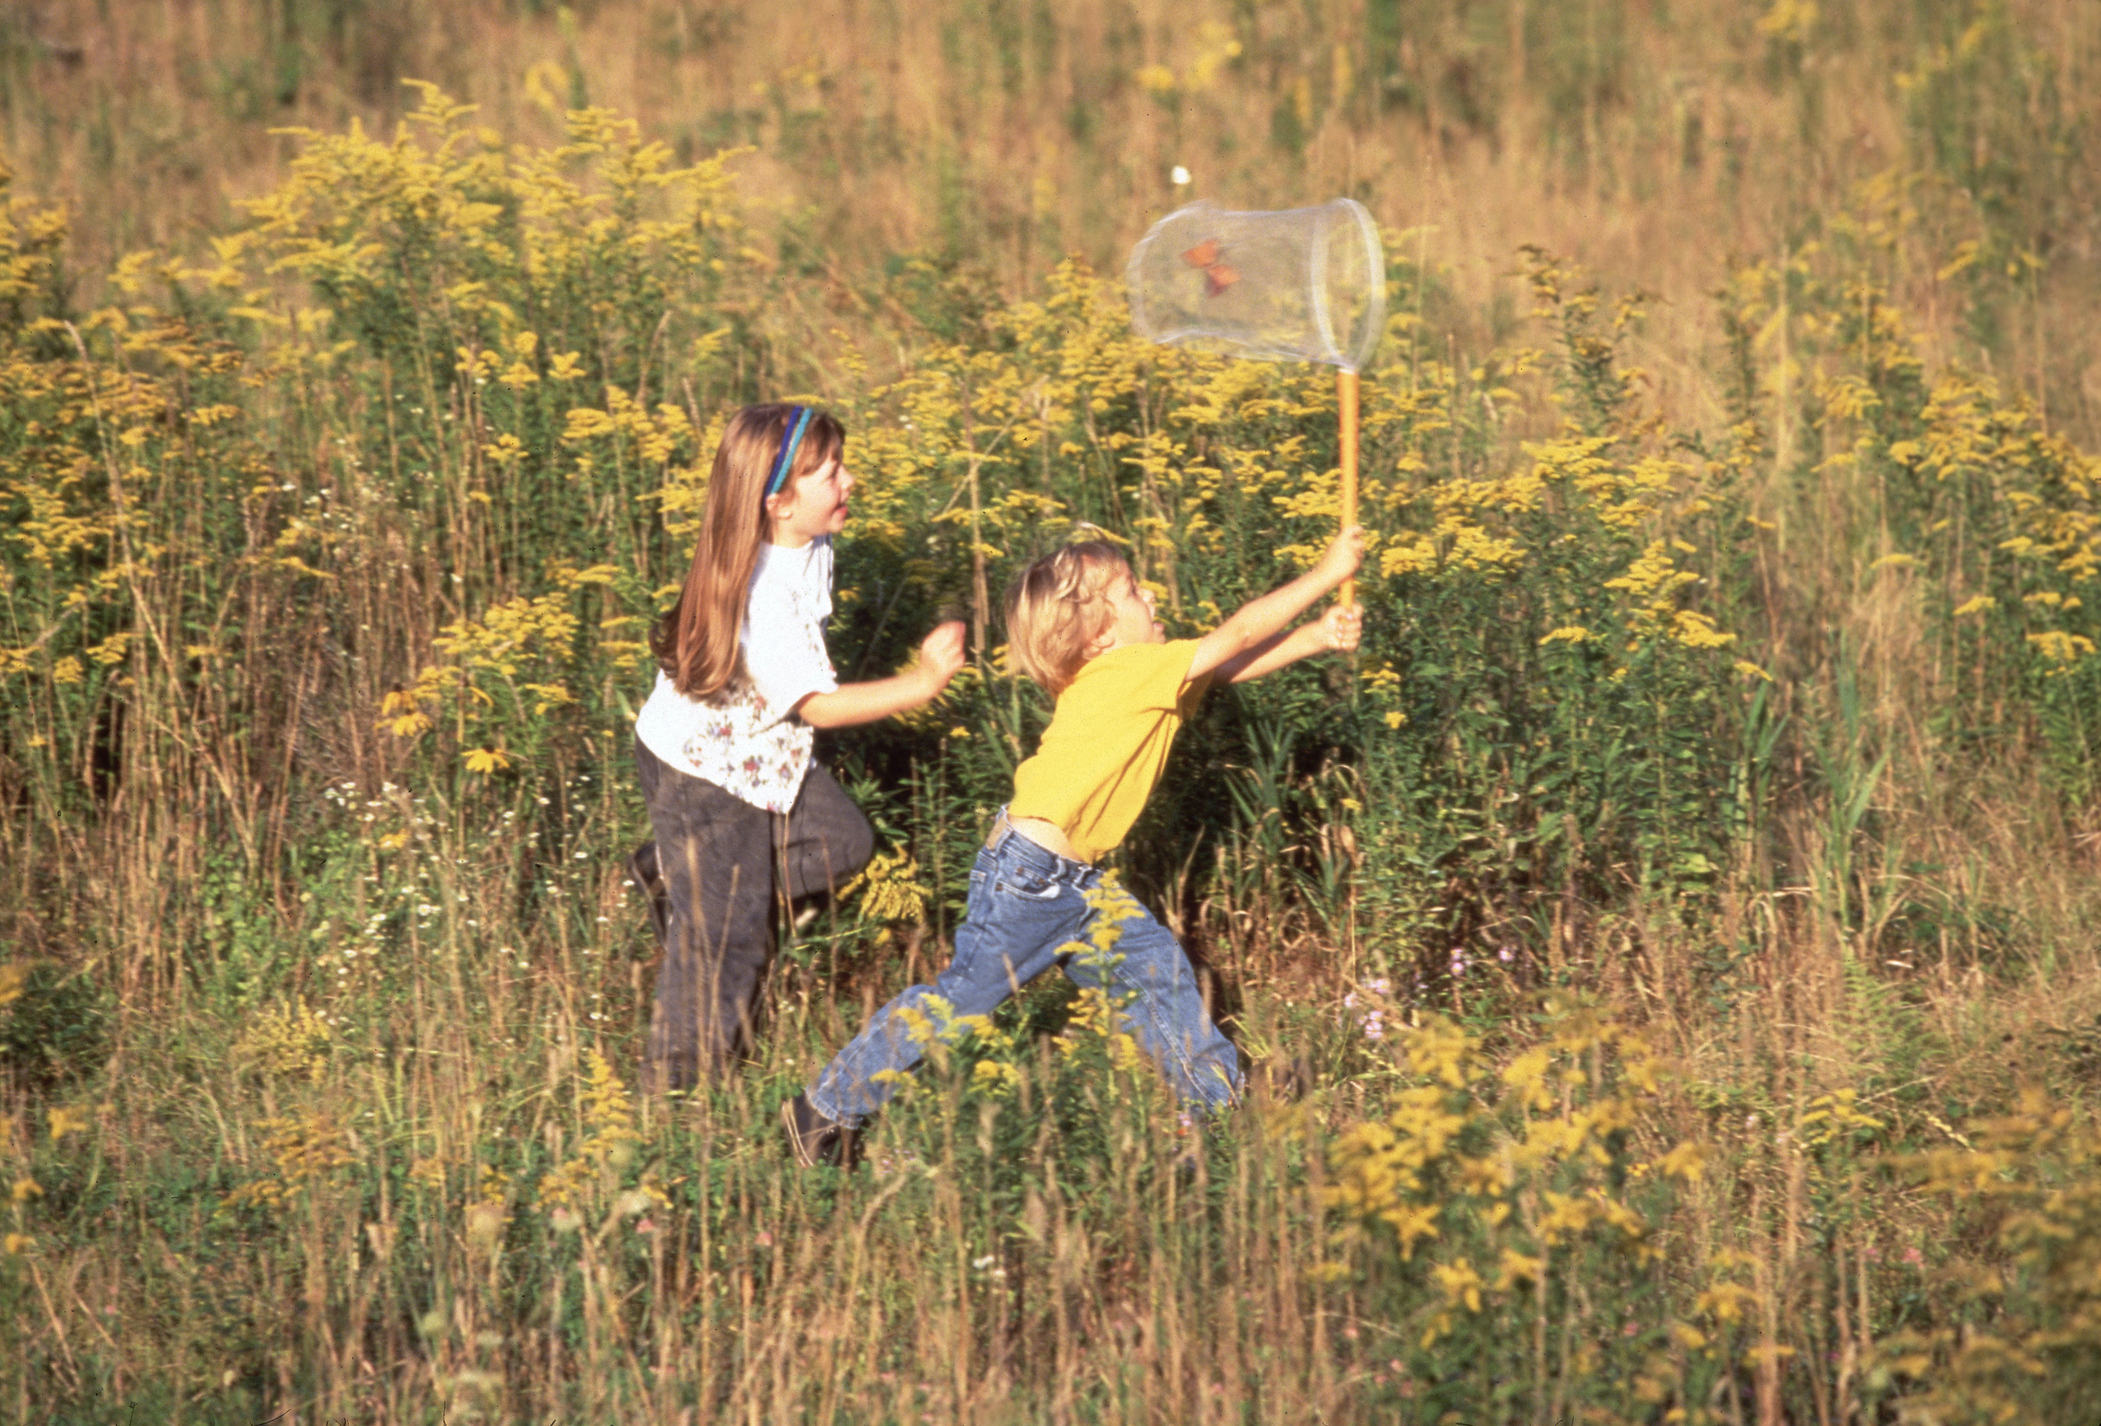 Two kids are catching butterflies in a field